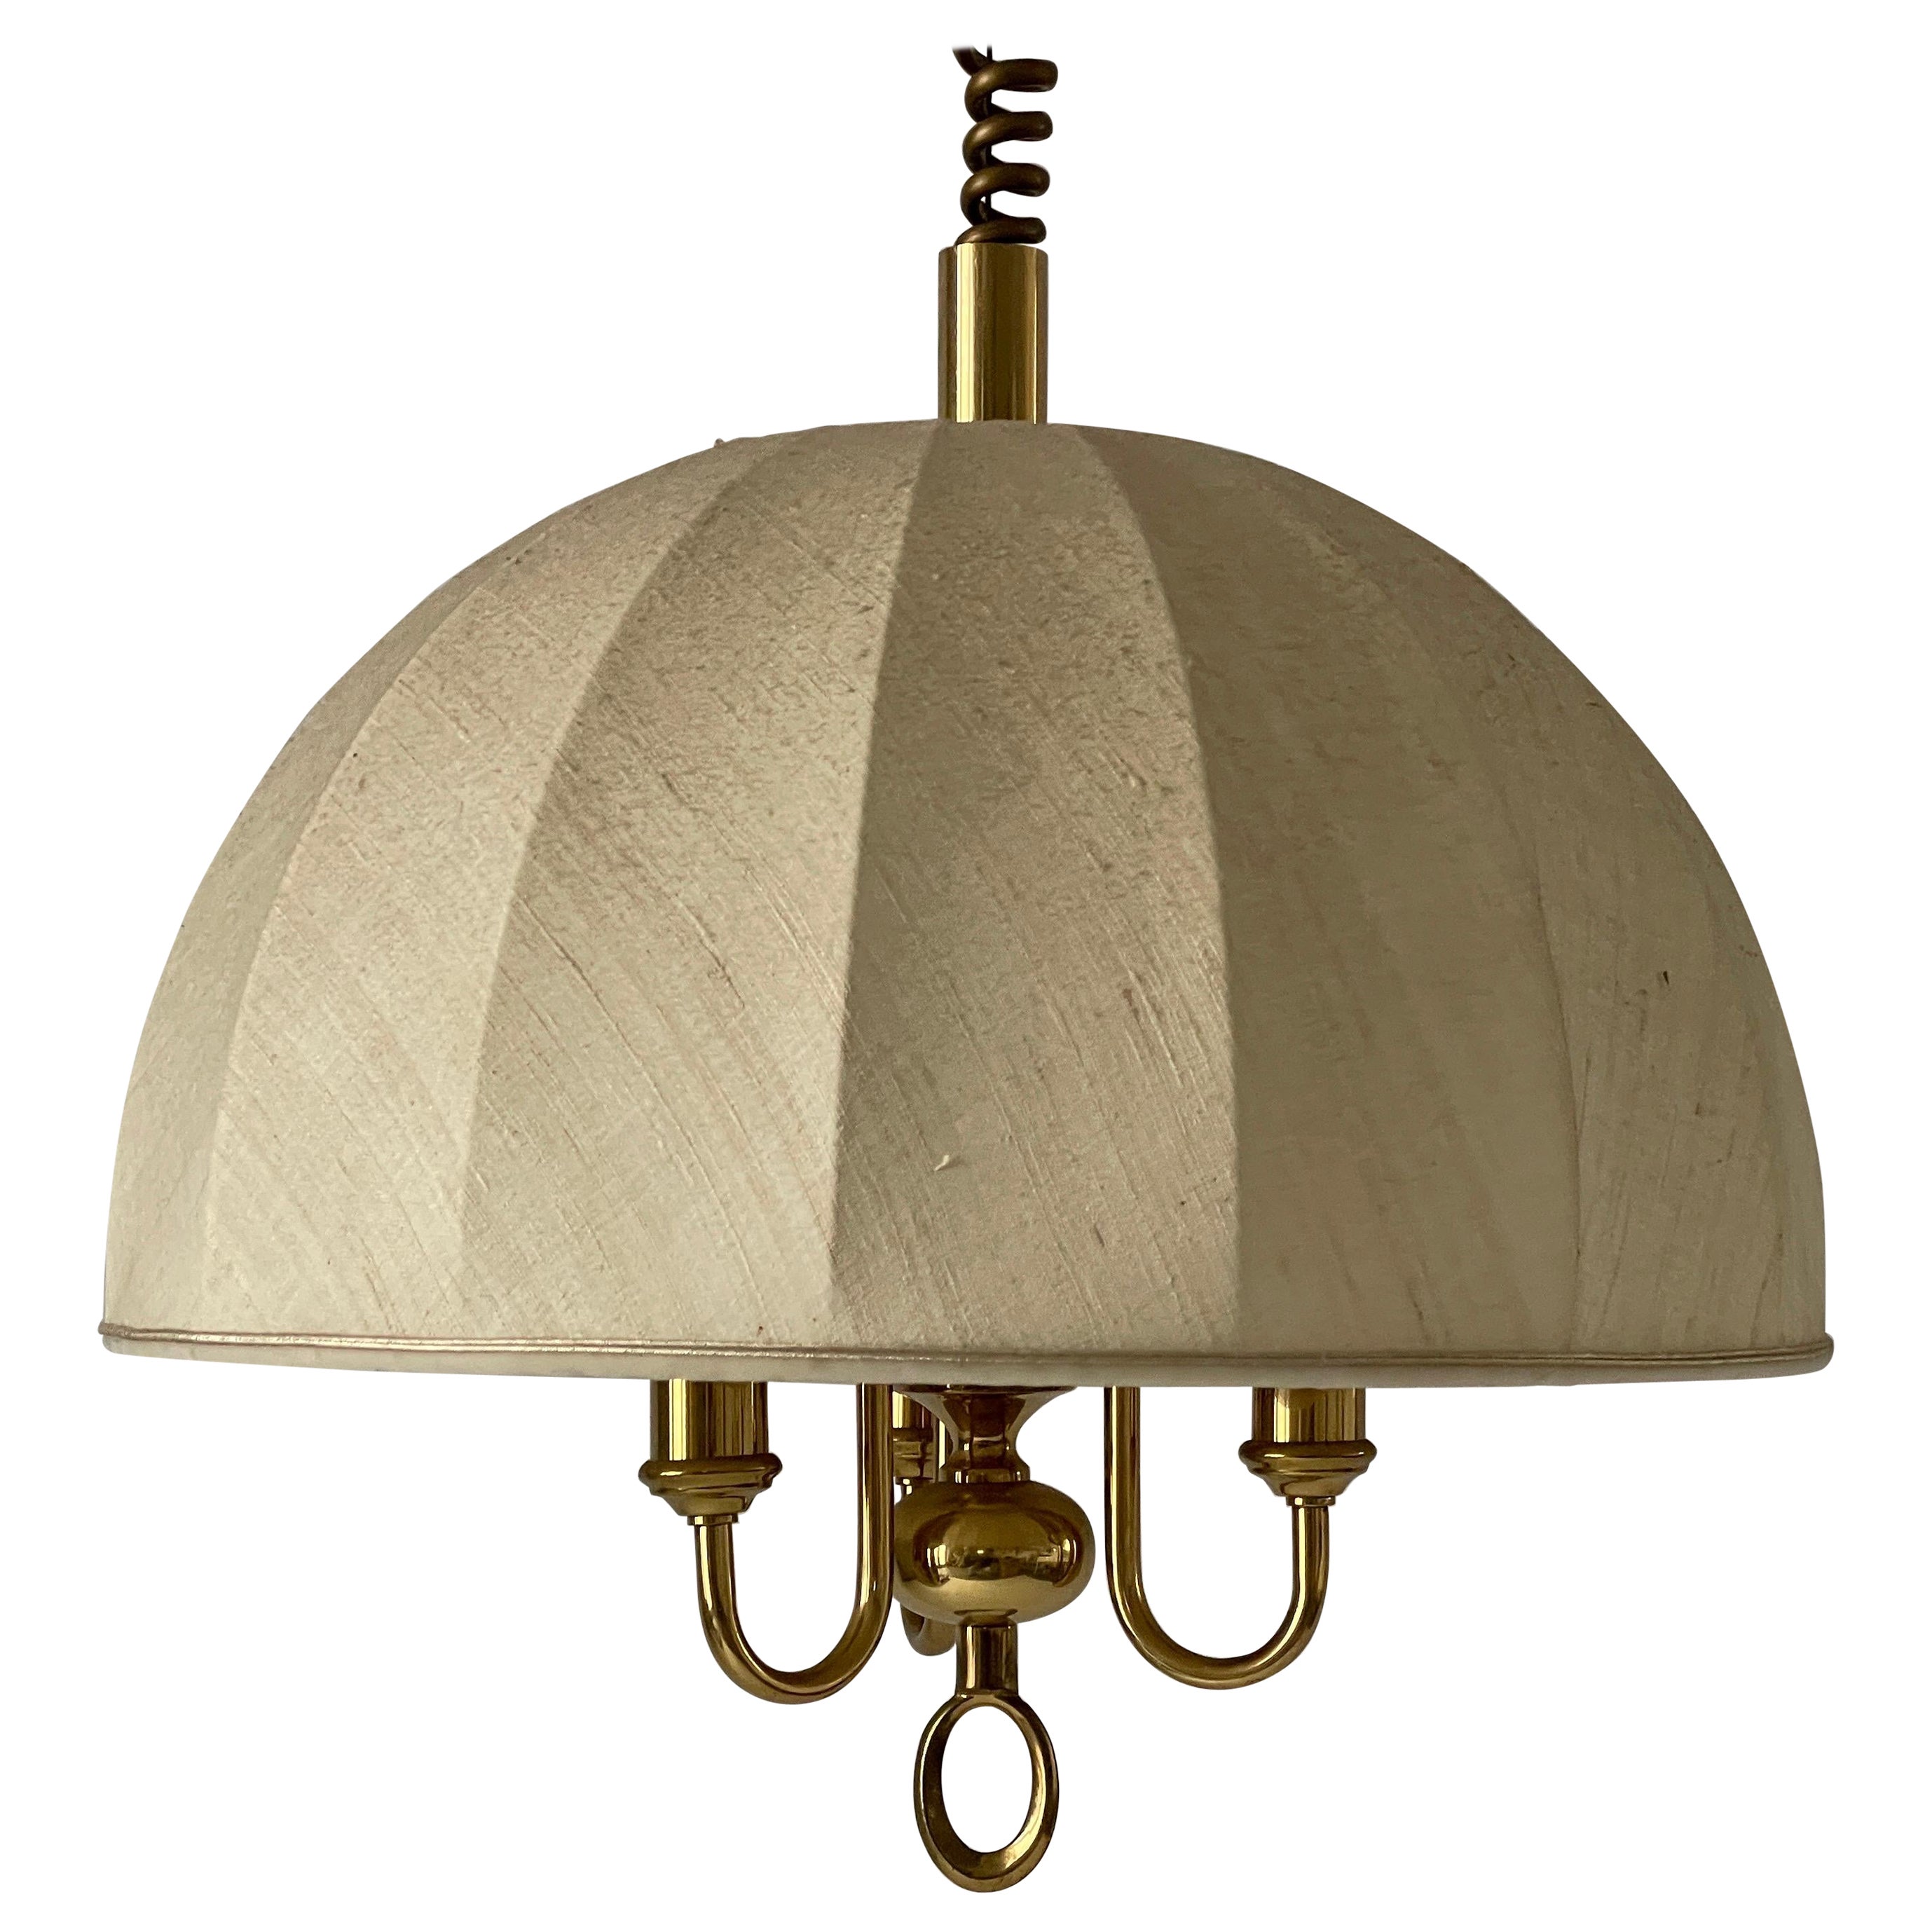 Fabric and Brass 3 socket Adjustable Shade Pendant Lamp by WKR, 1970s, Germany